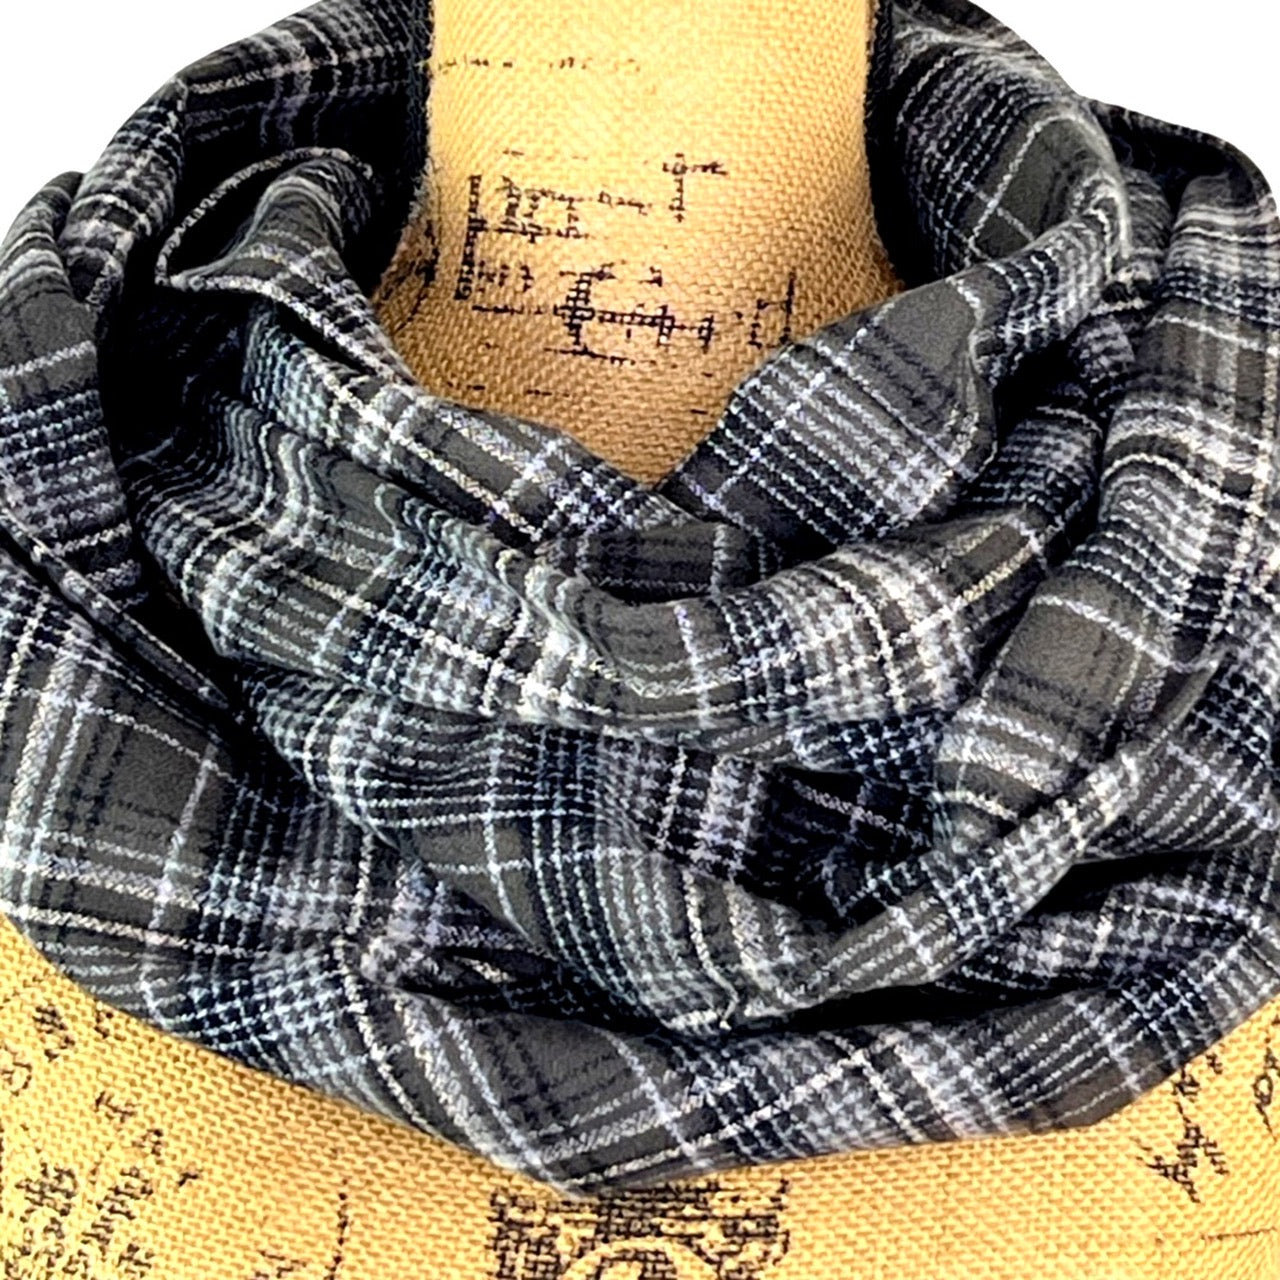 100% Organic Cotton Warm Dark Grey, Black and White Plaid Infinity and Blanket Scarves